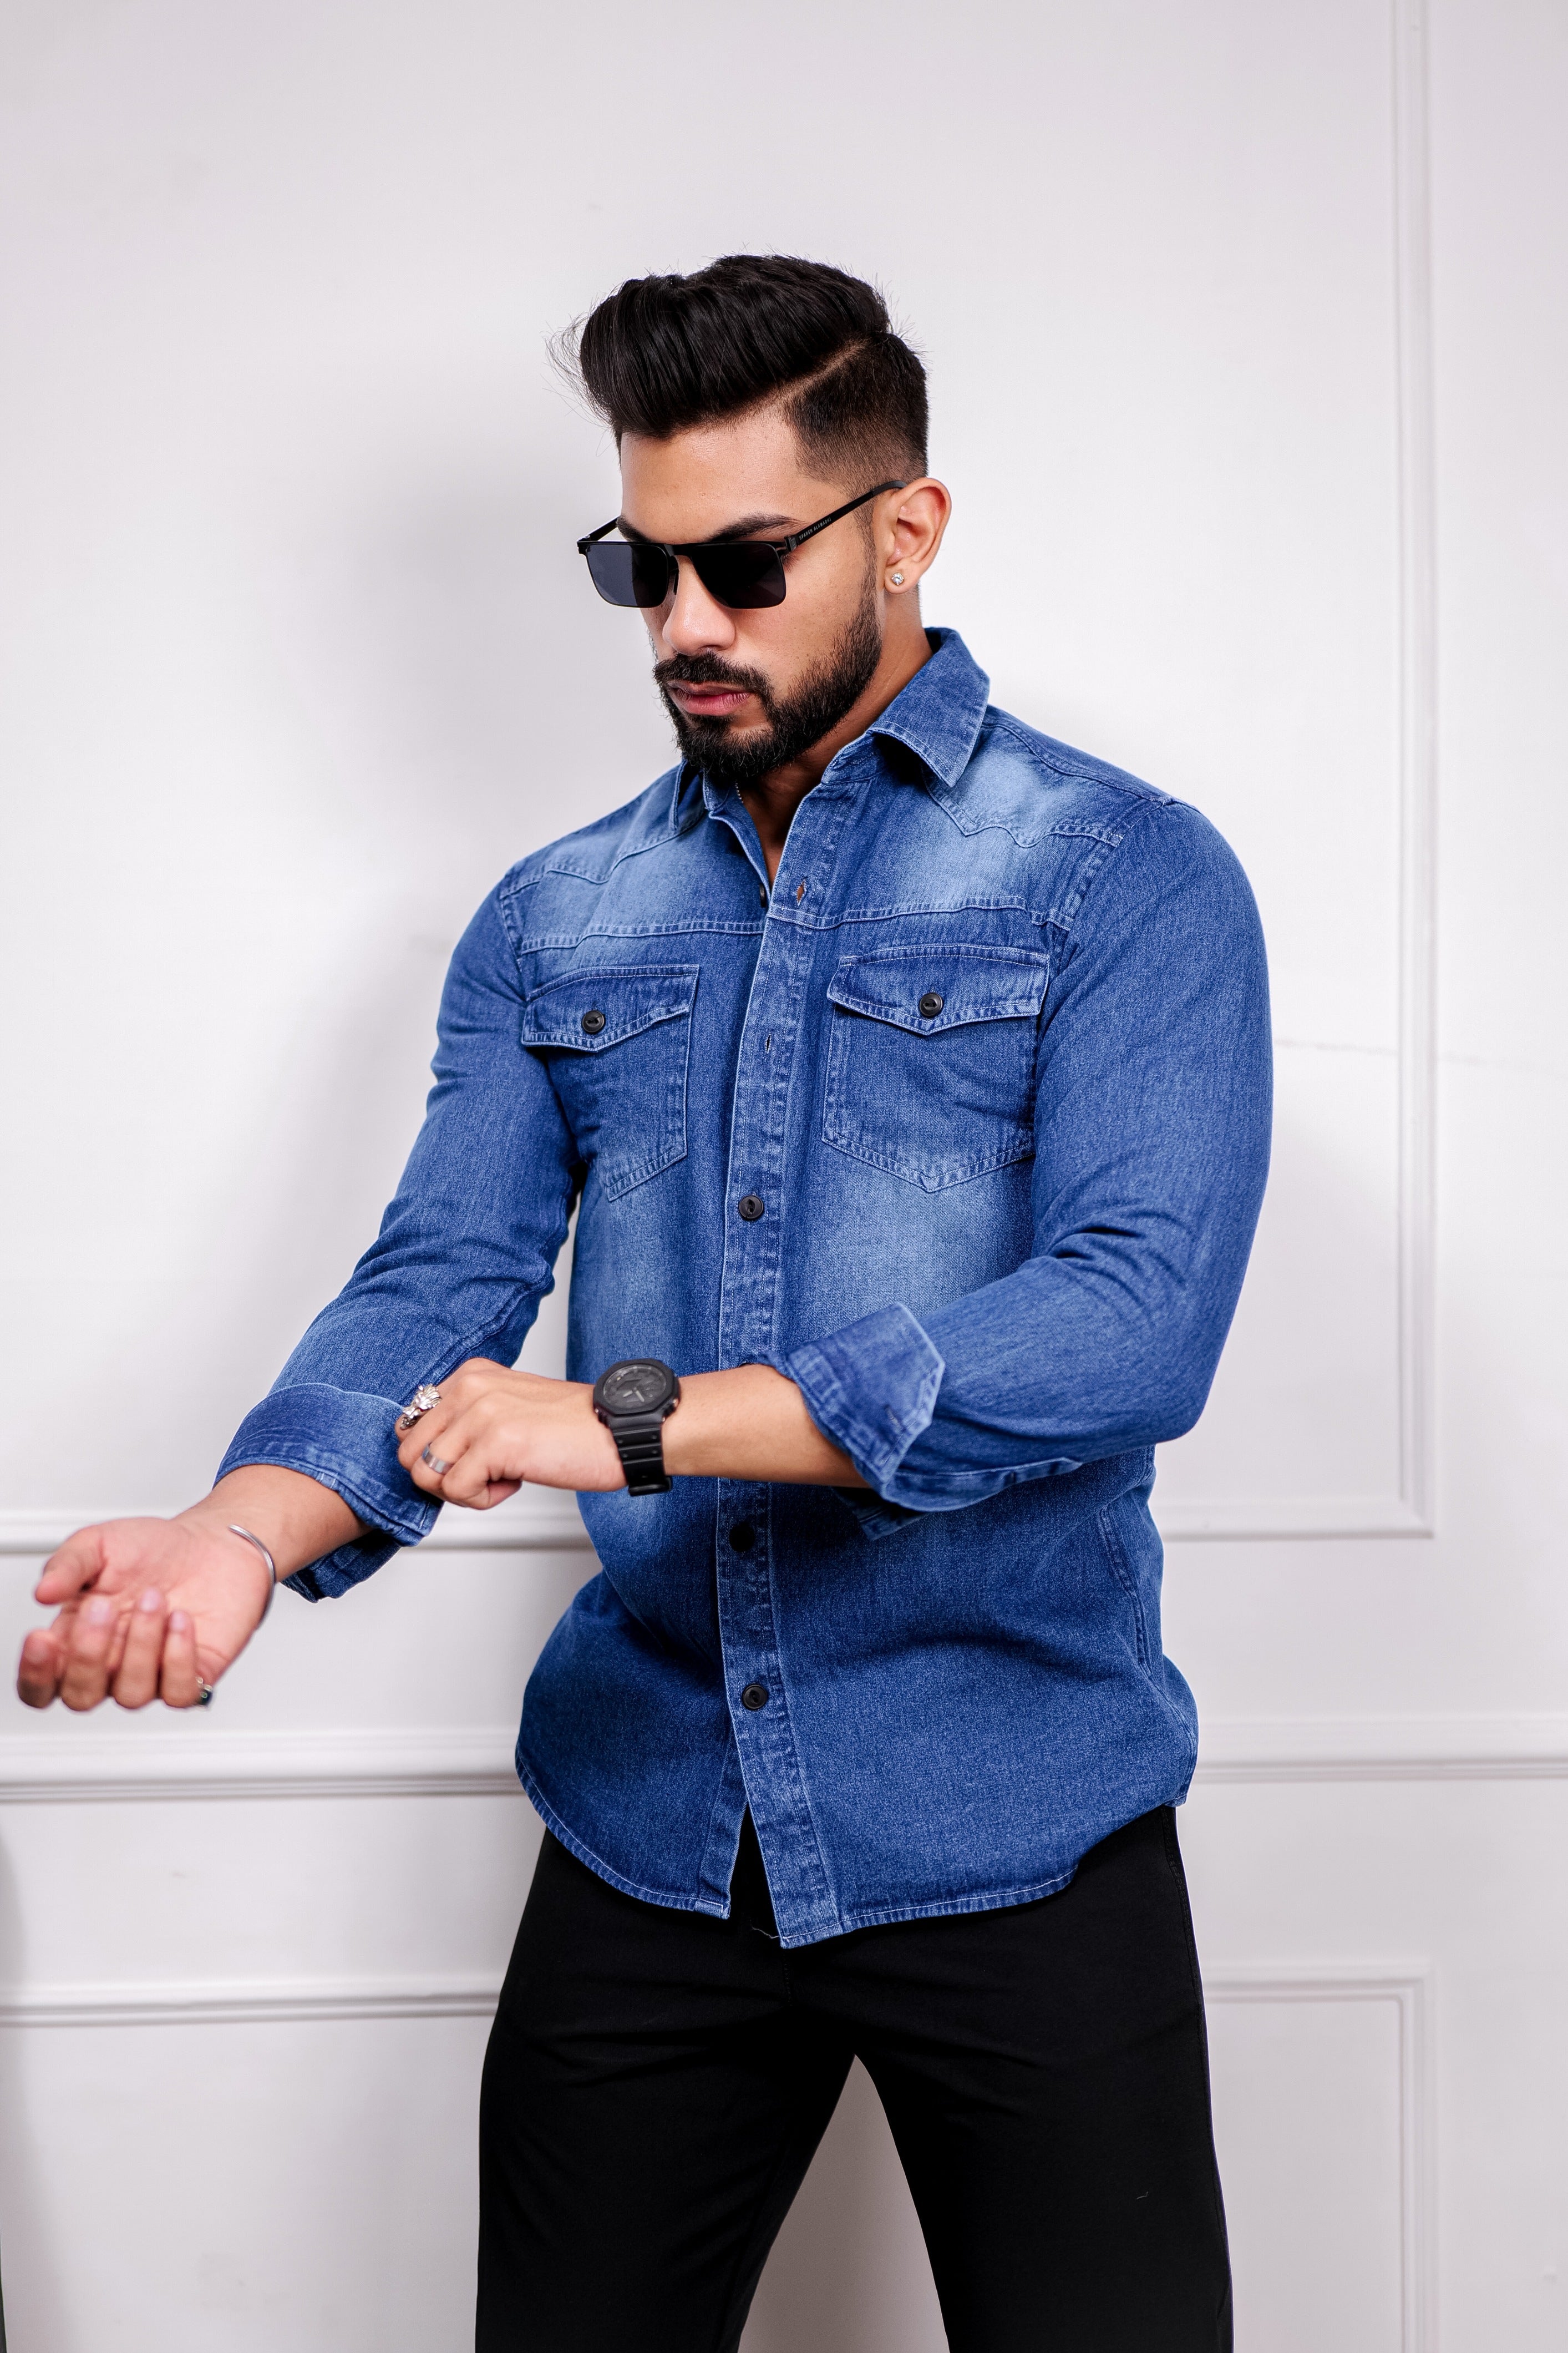 Cheap AIOPESON Cotton Men's Denim Shirts Double Pocket Solid Color Casual  Male Cowboy Shirts Autumn Slim Fit Thin Shirts for Men New | Joom